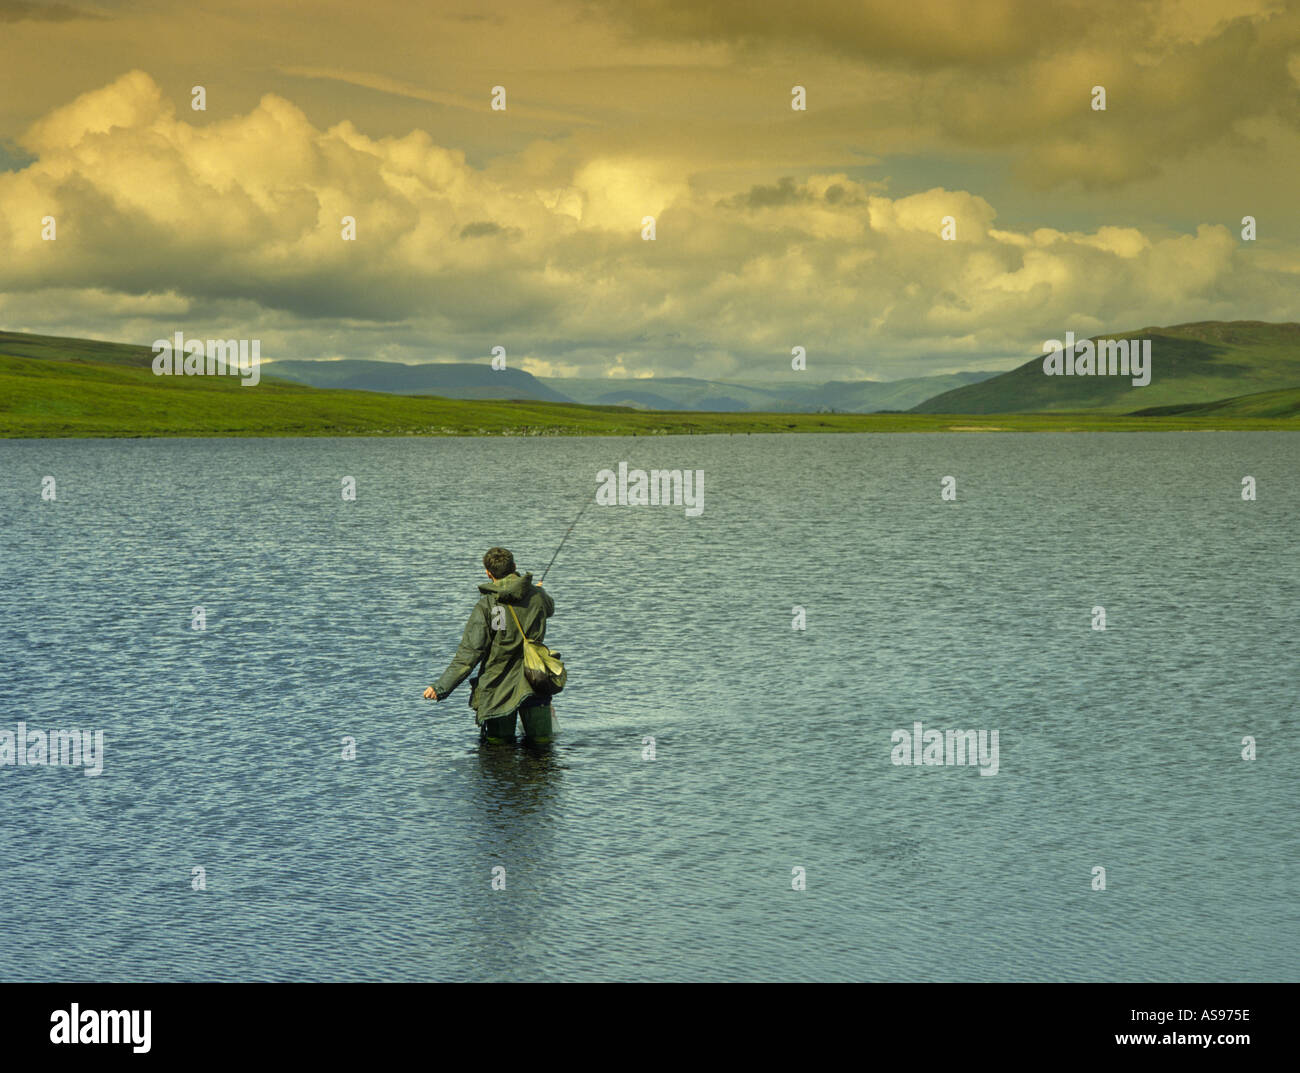 Fly Fishing for Trout on Loch Pattack Dalwhinnie Inverness-shire Scotland UK  GFIM 1004 Stock Photo